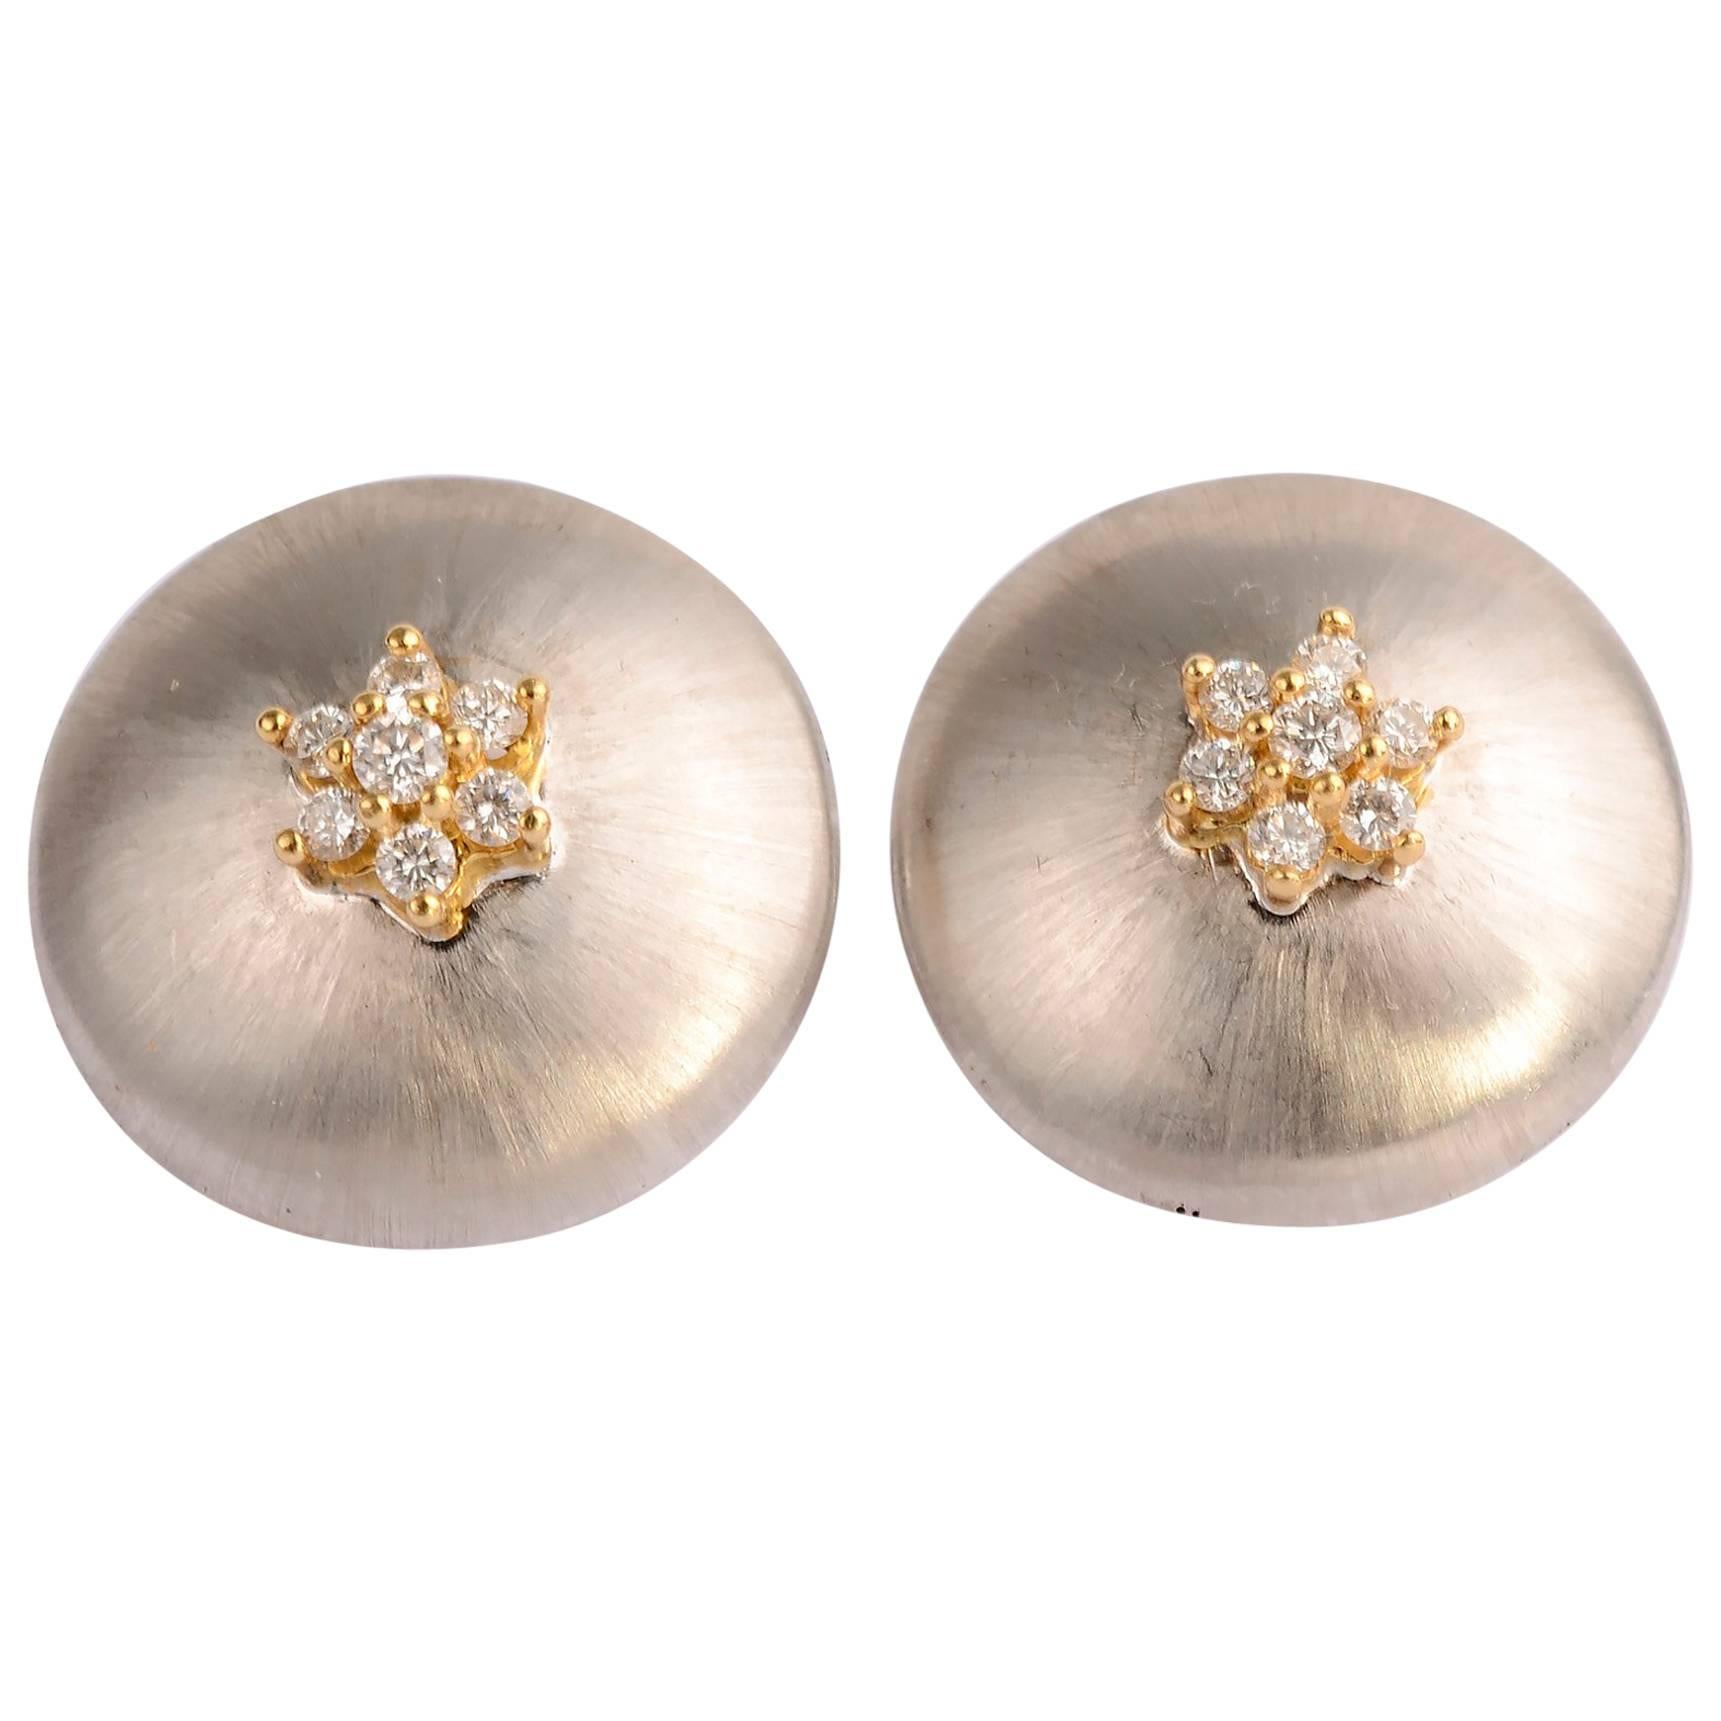 White and Yellow Domed Gold Earrings with Diamonds